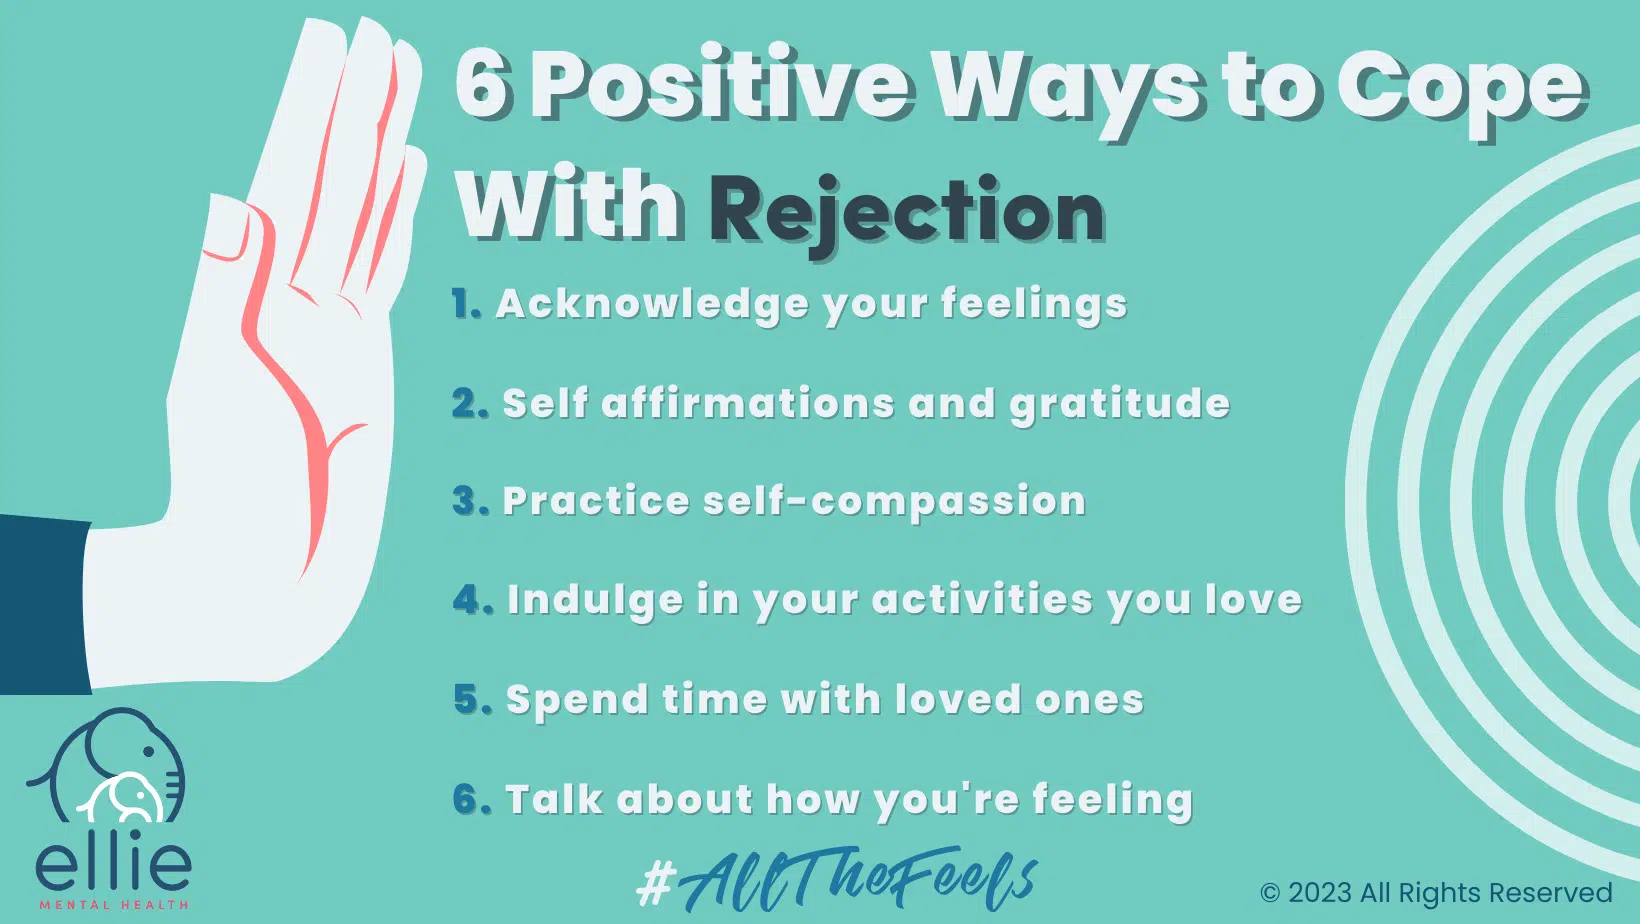 6 Positive Ways to Cope With Rejection Infographic